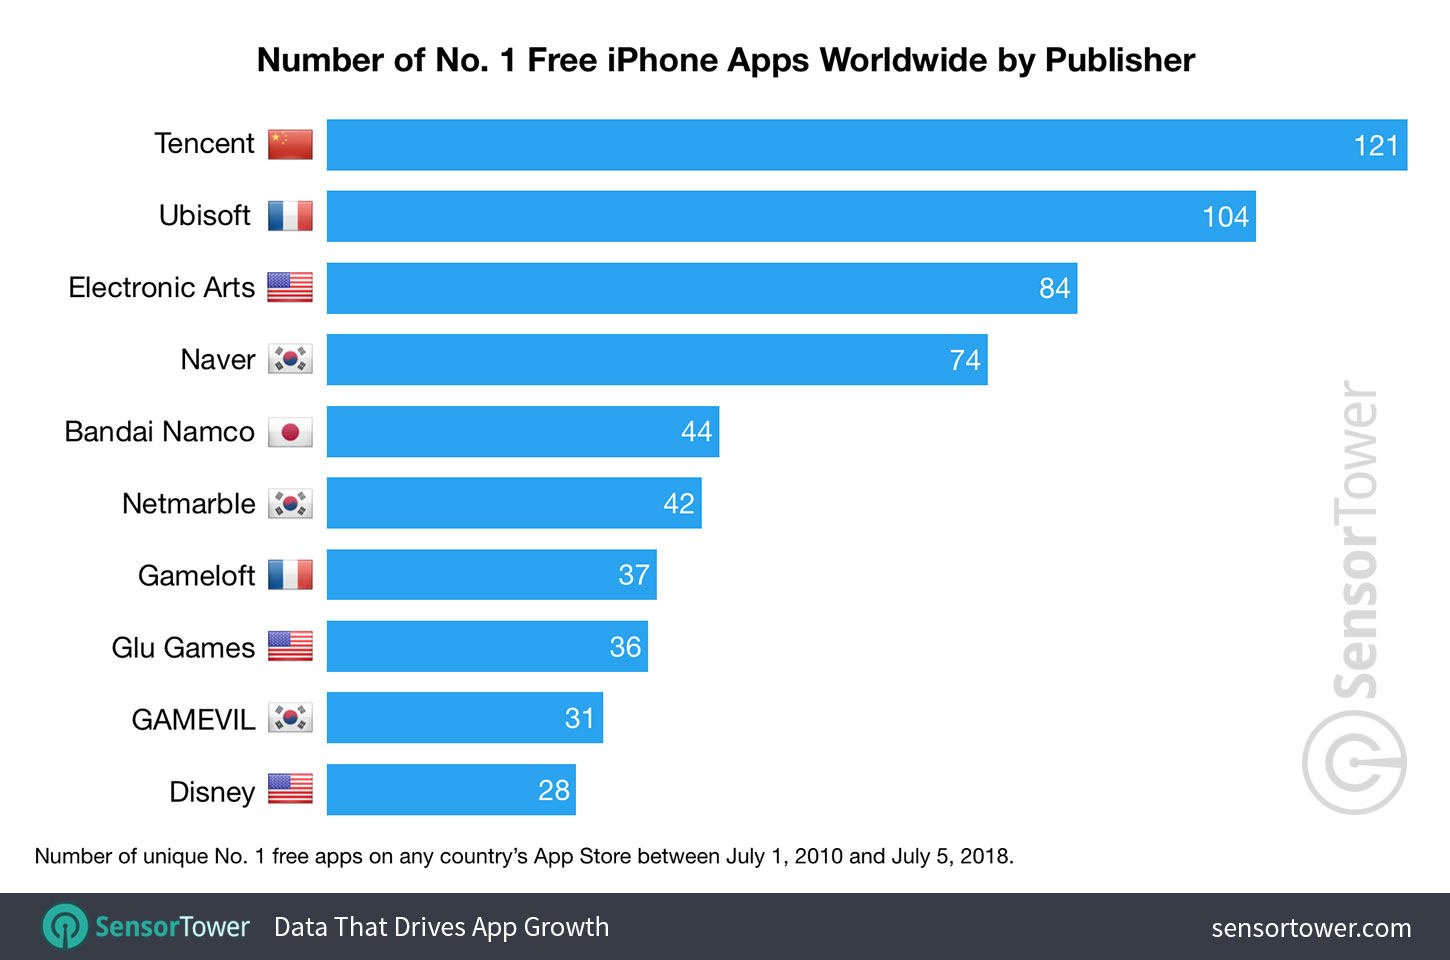 Chart showing a ranking of publishers by number of apps that reached No. 1 top grossing on iPhone on the Worldwide App Store